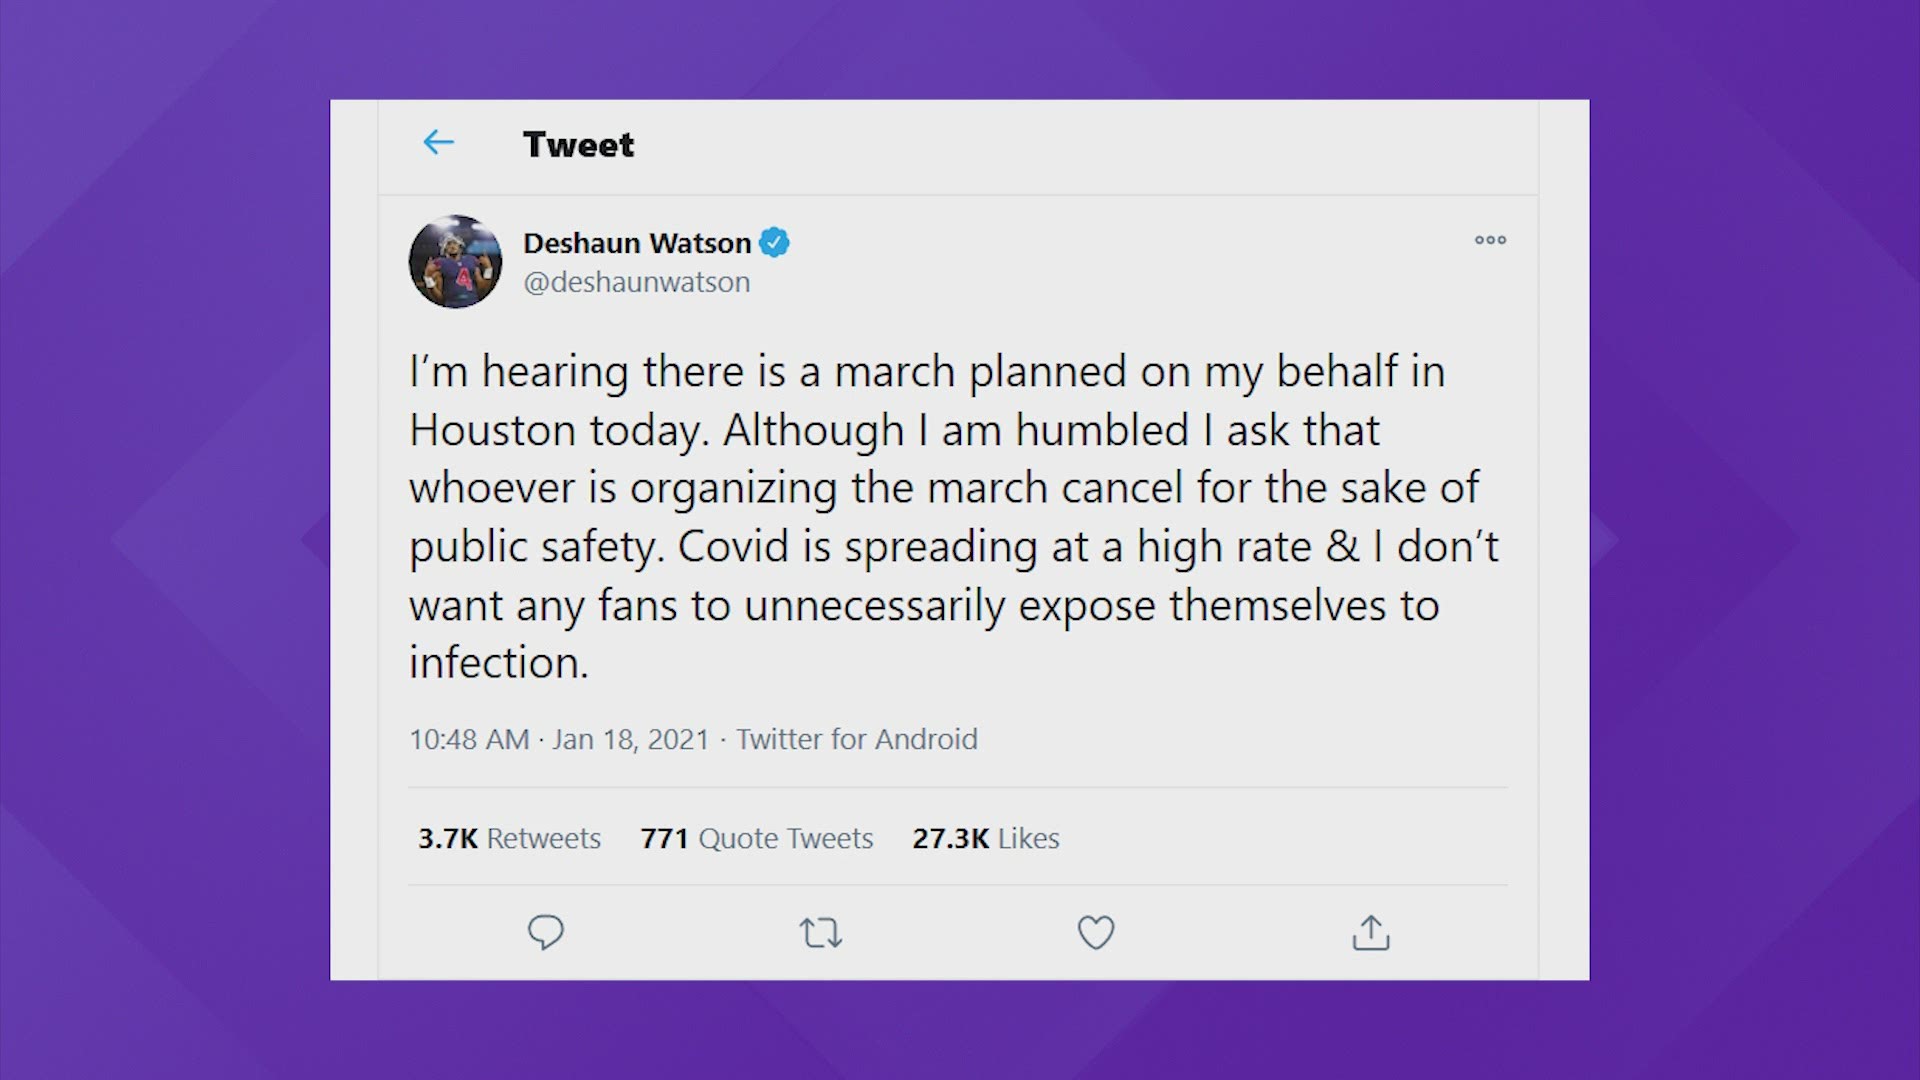 Deshaun Watson asks fans not to march on his behalf out of concerned for public safety and coronavirus spread.